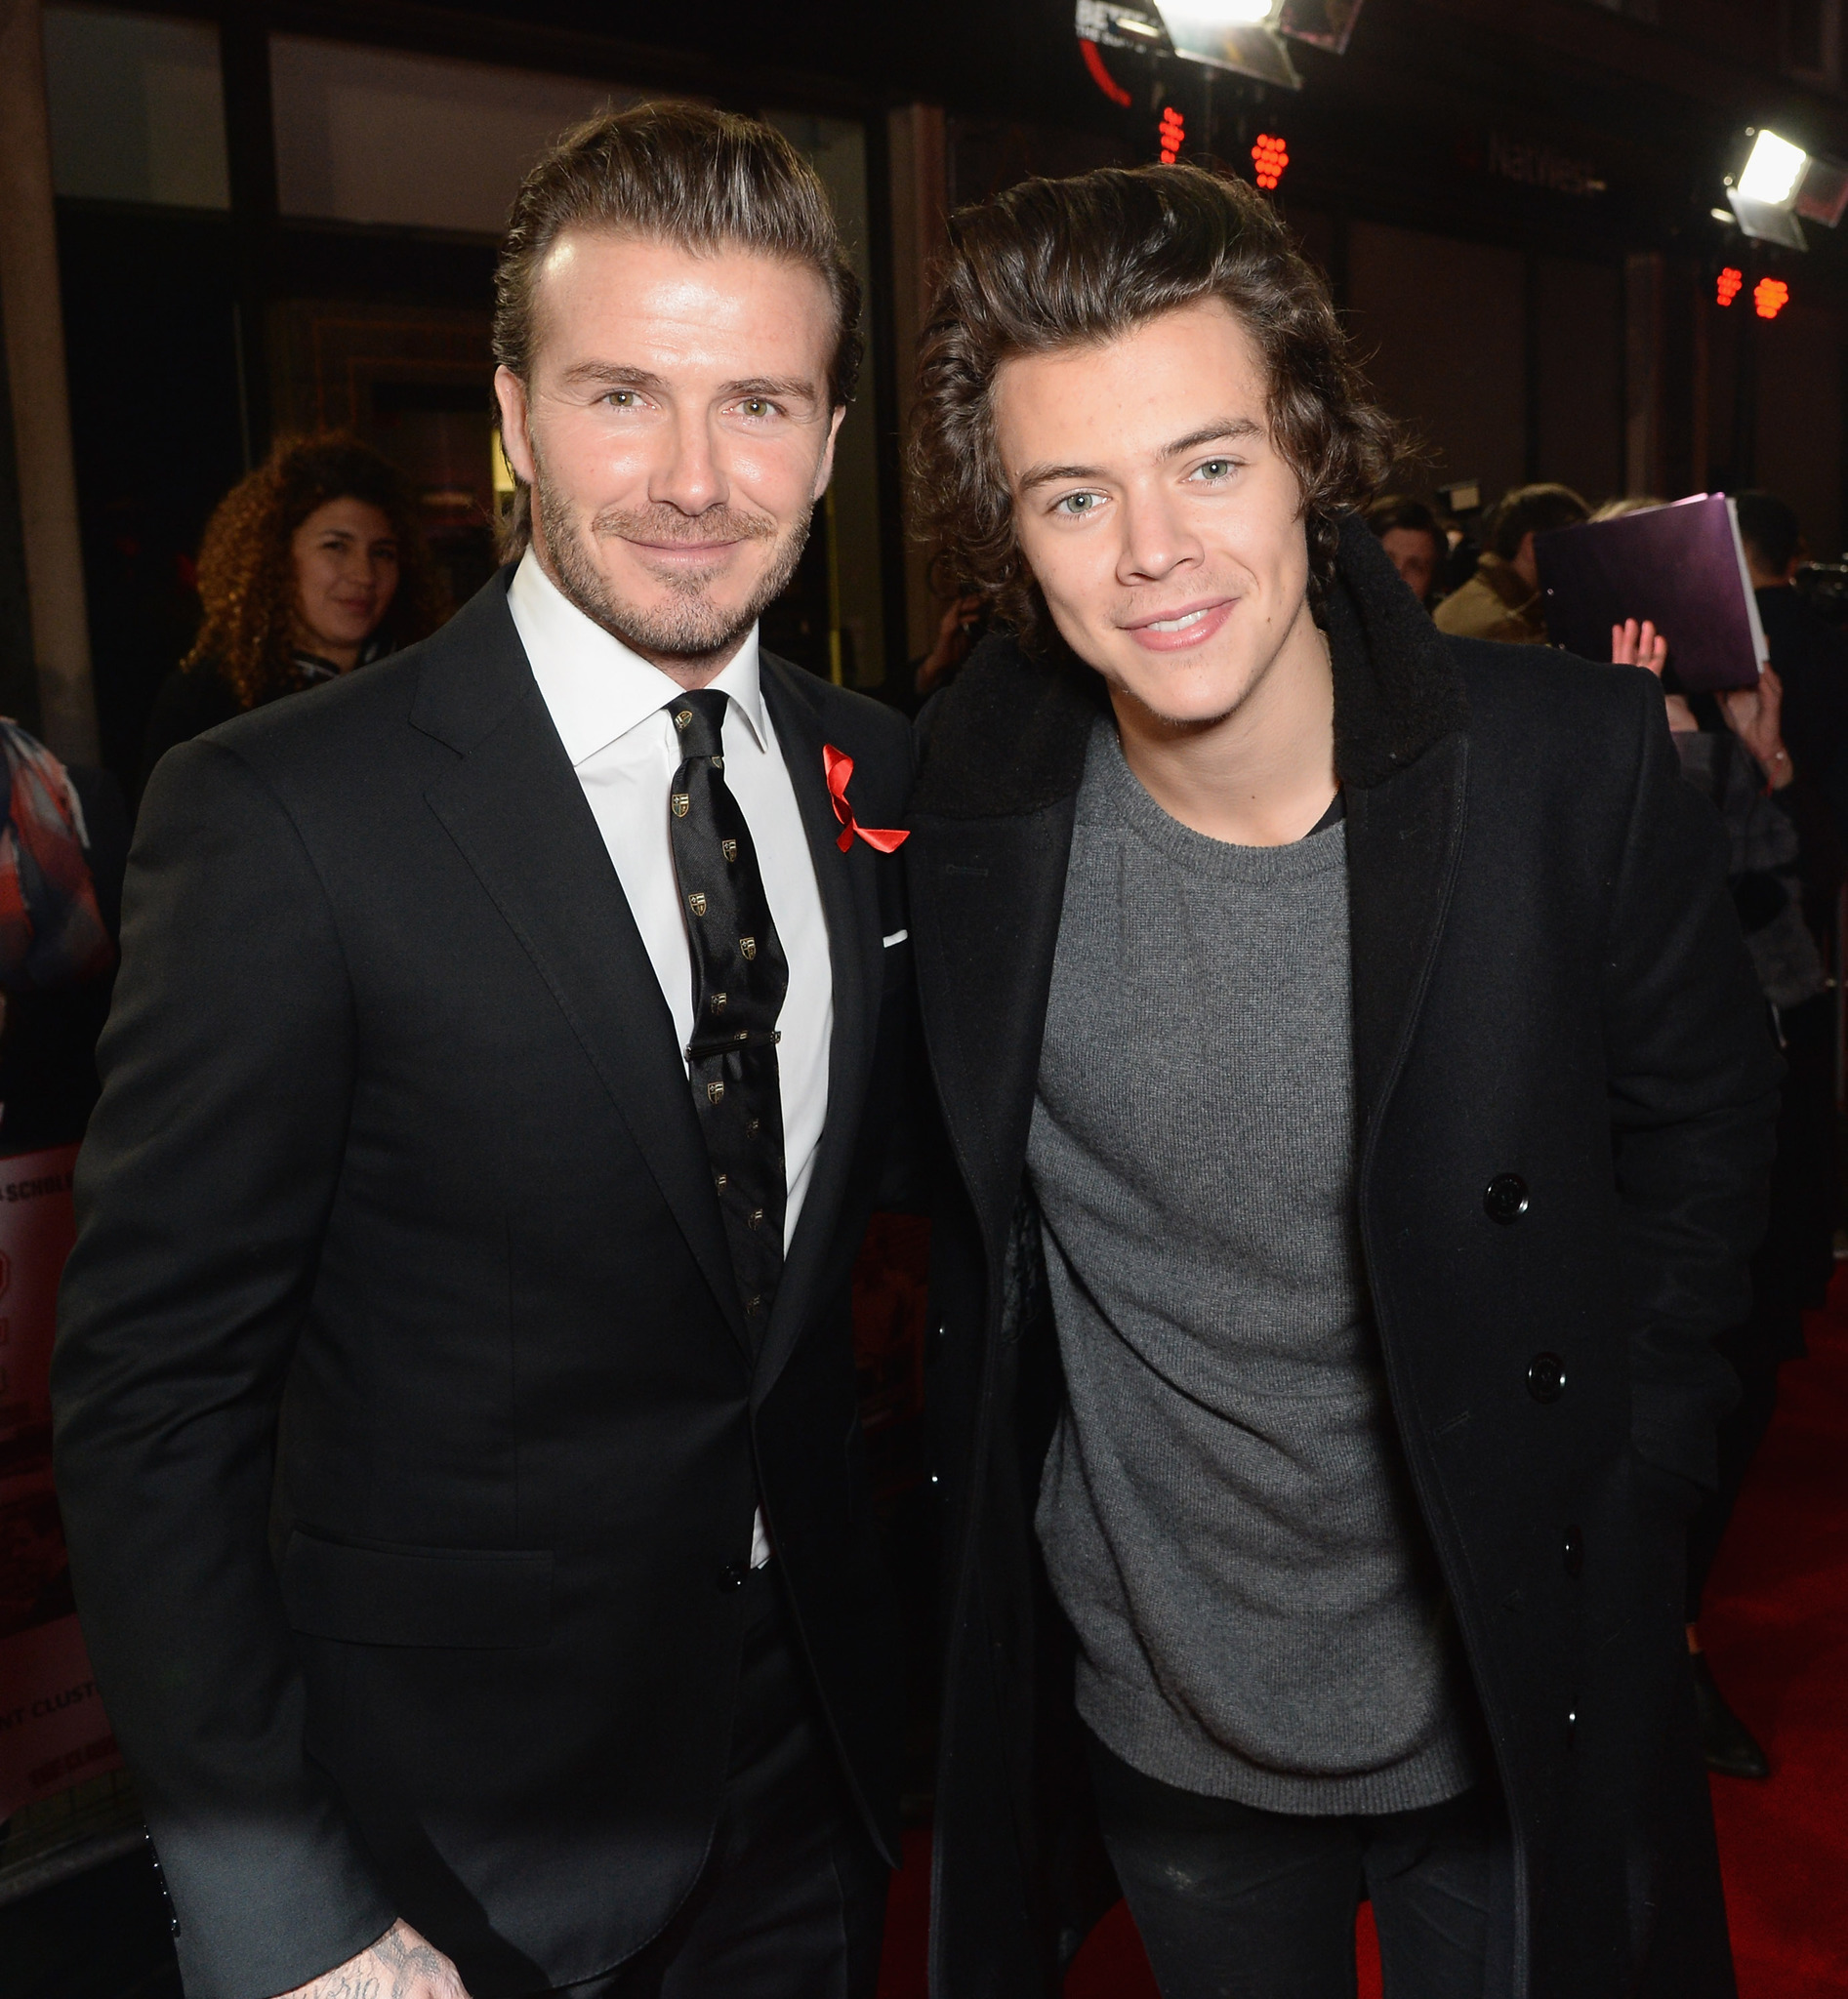 David Beckham and Harry Styles at event of The Class of 92 (2013)